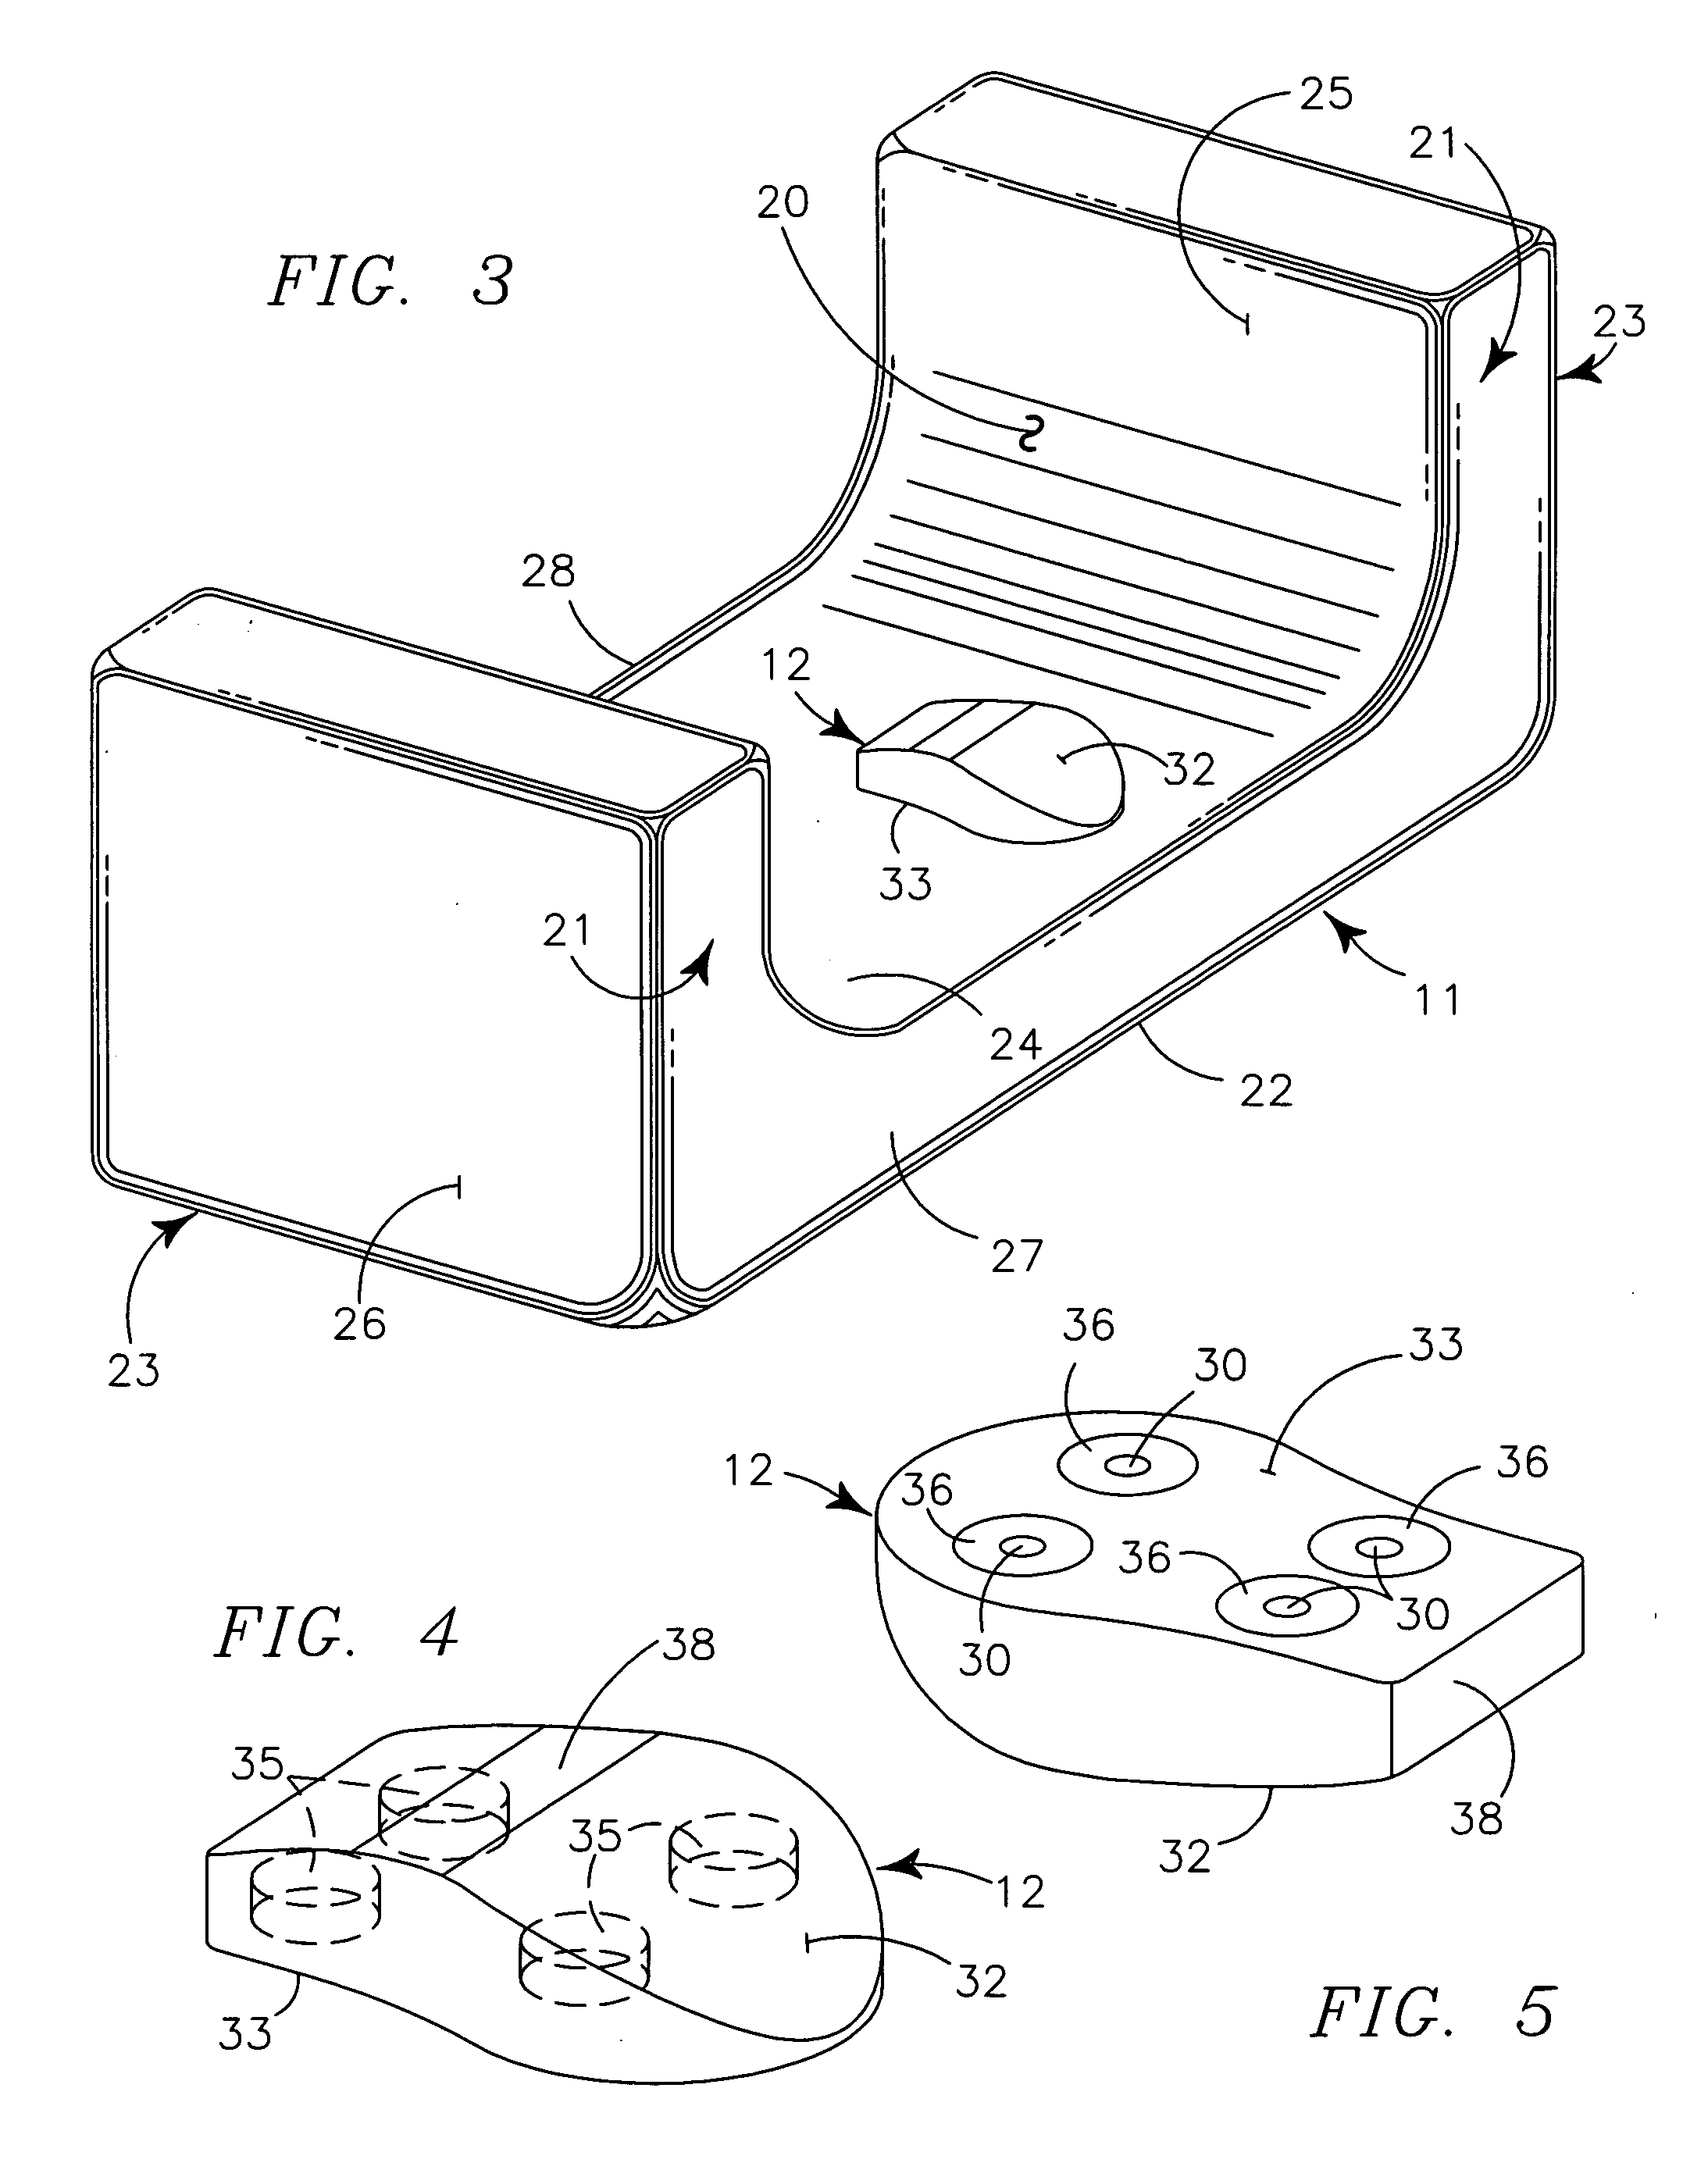 Magnetically resistive exercise device for rehabilitative therapy